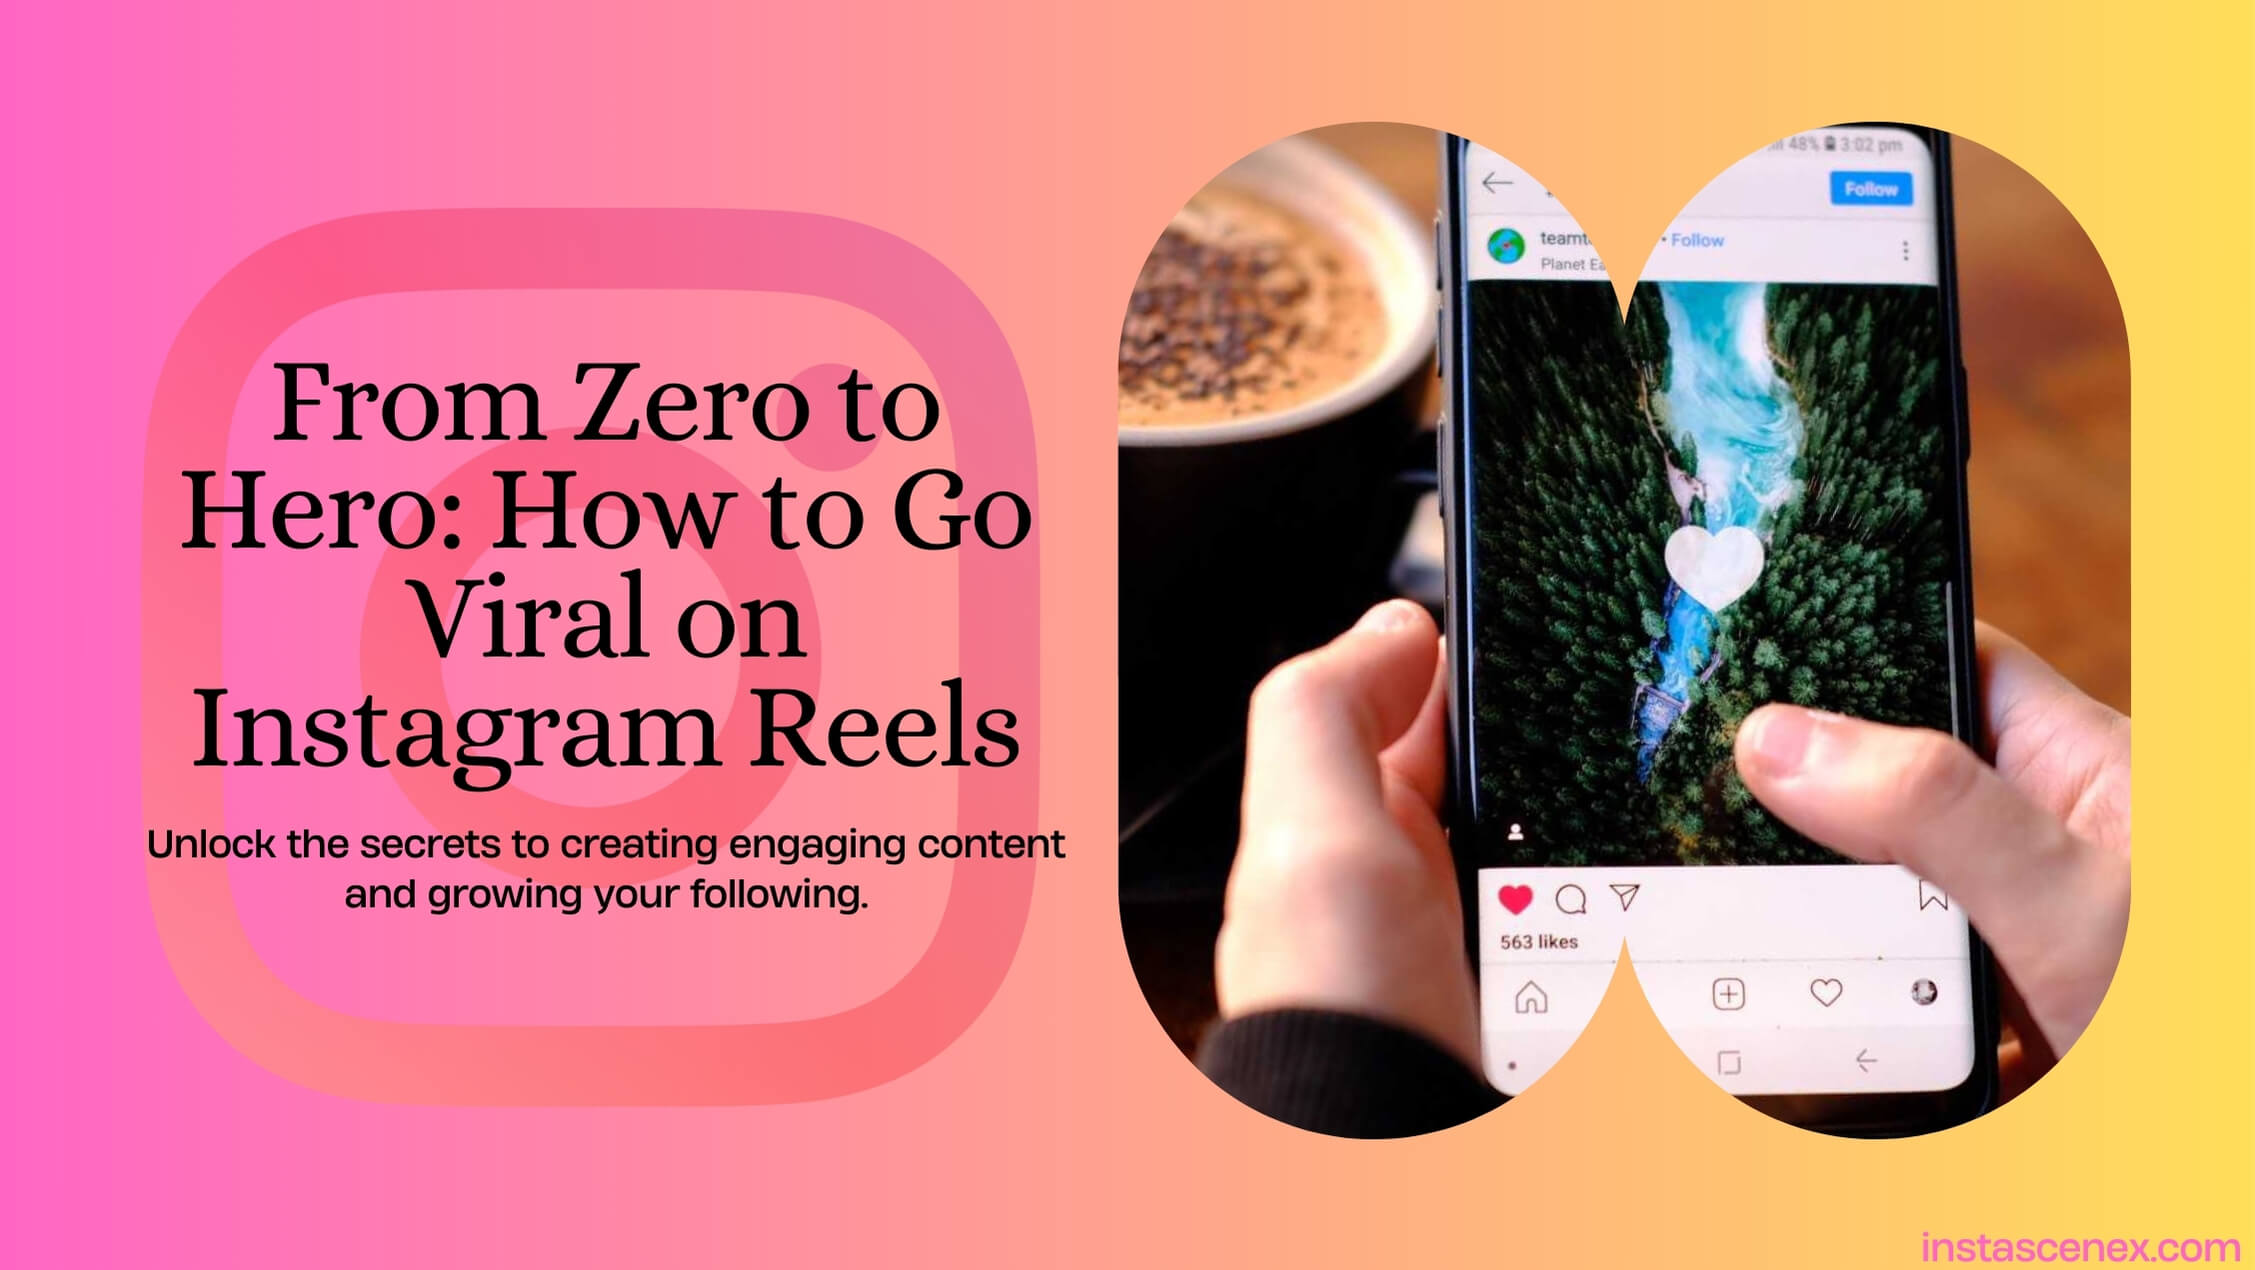 From Zero to Hero: How to Go Viral on Instagram Reels